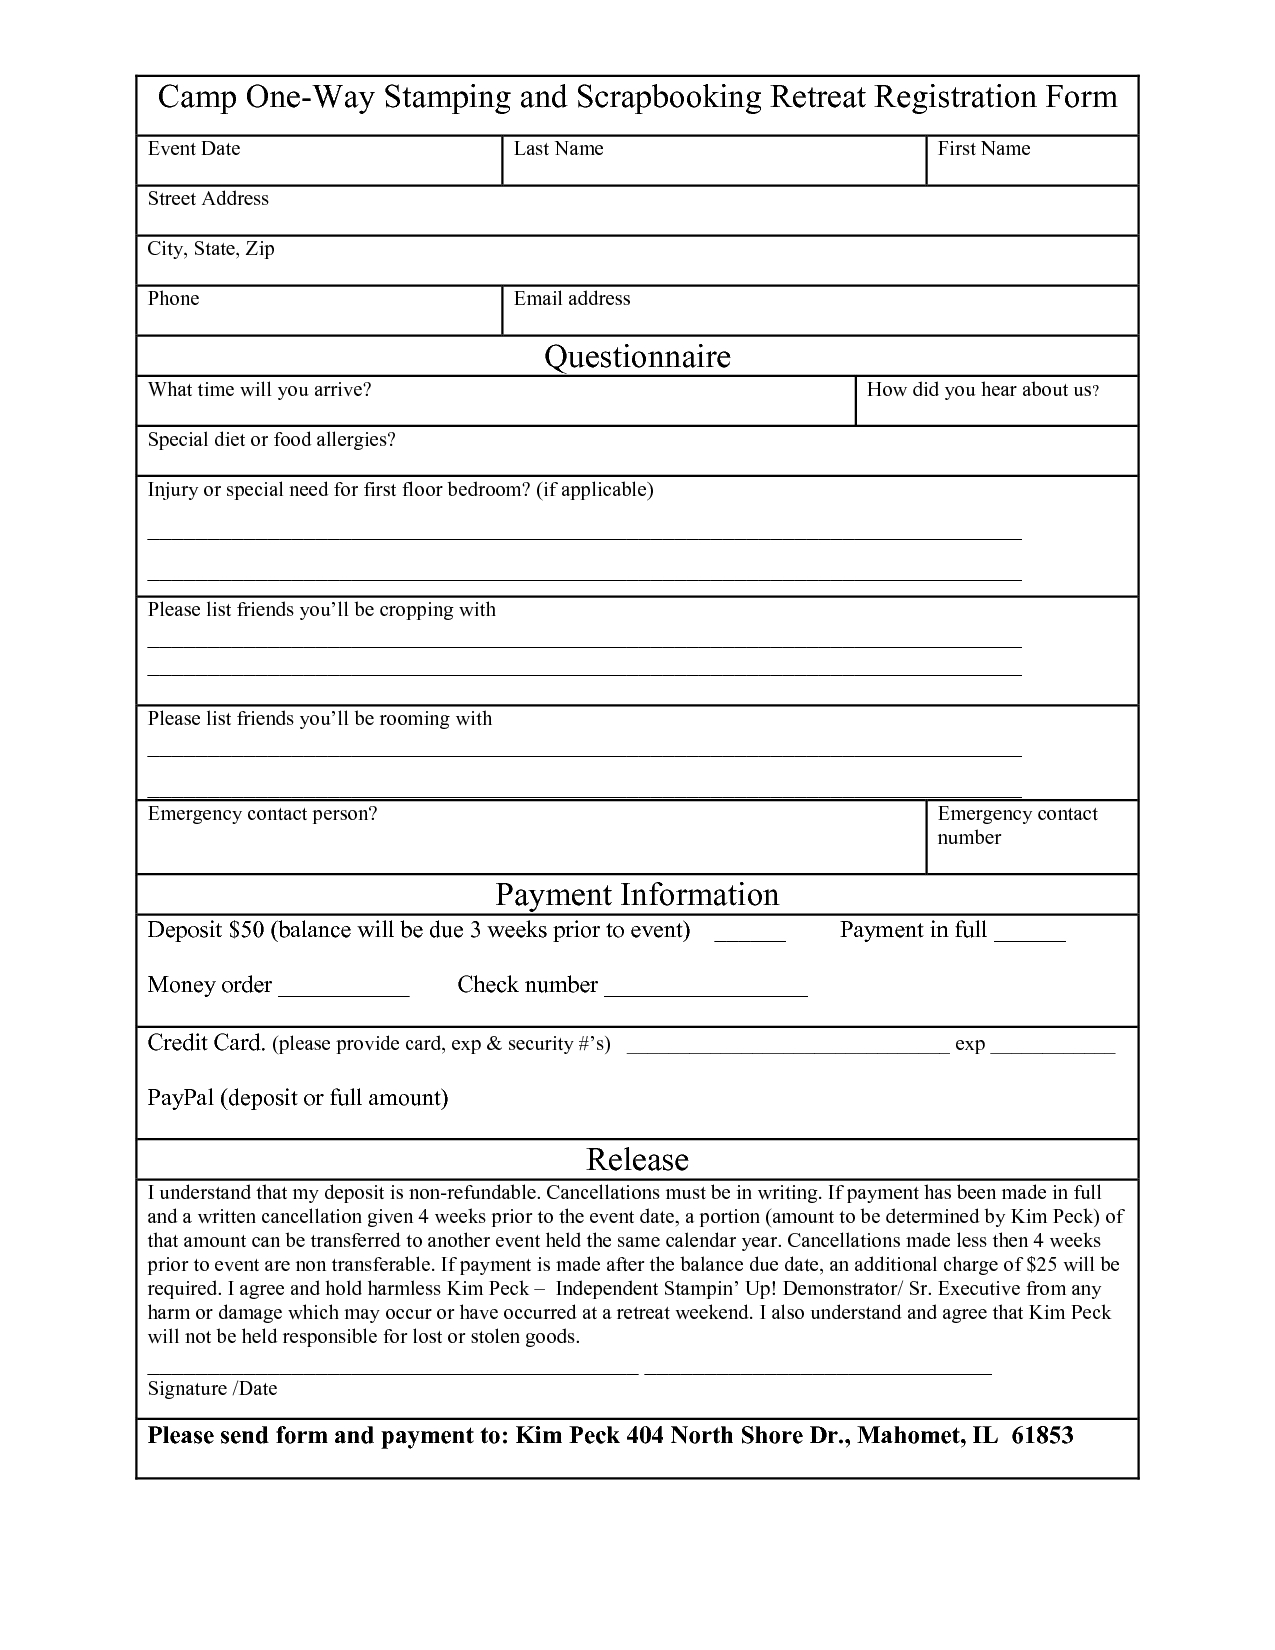 Free Registration Form Template Word Want A Free Refresher With Regard To Camp Registration Form Template Word